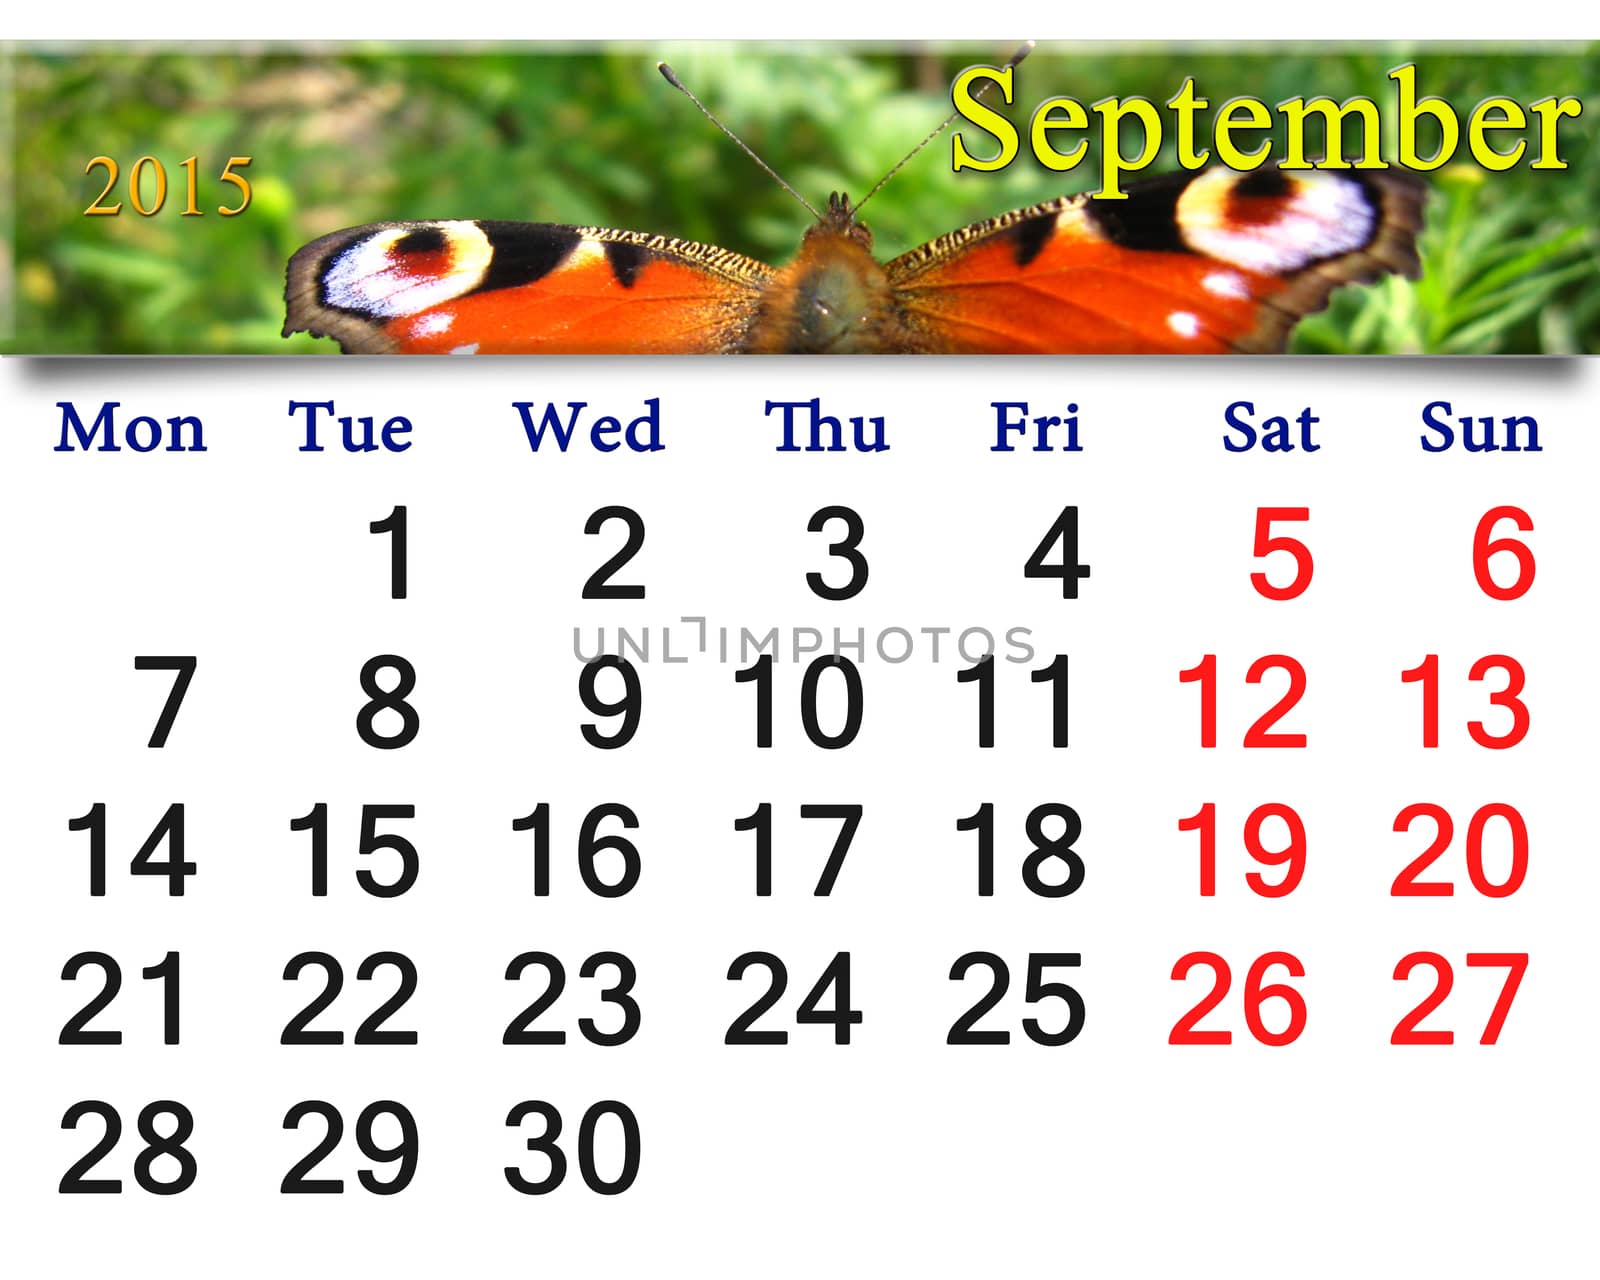 beautiful calendar for September of 2015 year with image of butterfly of peacock eye